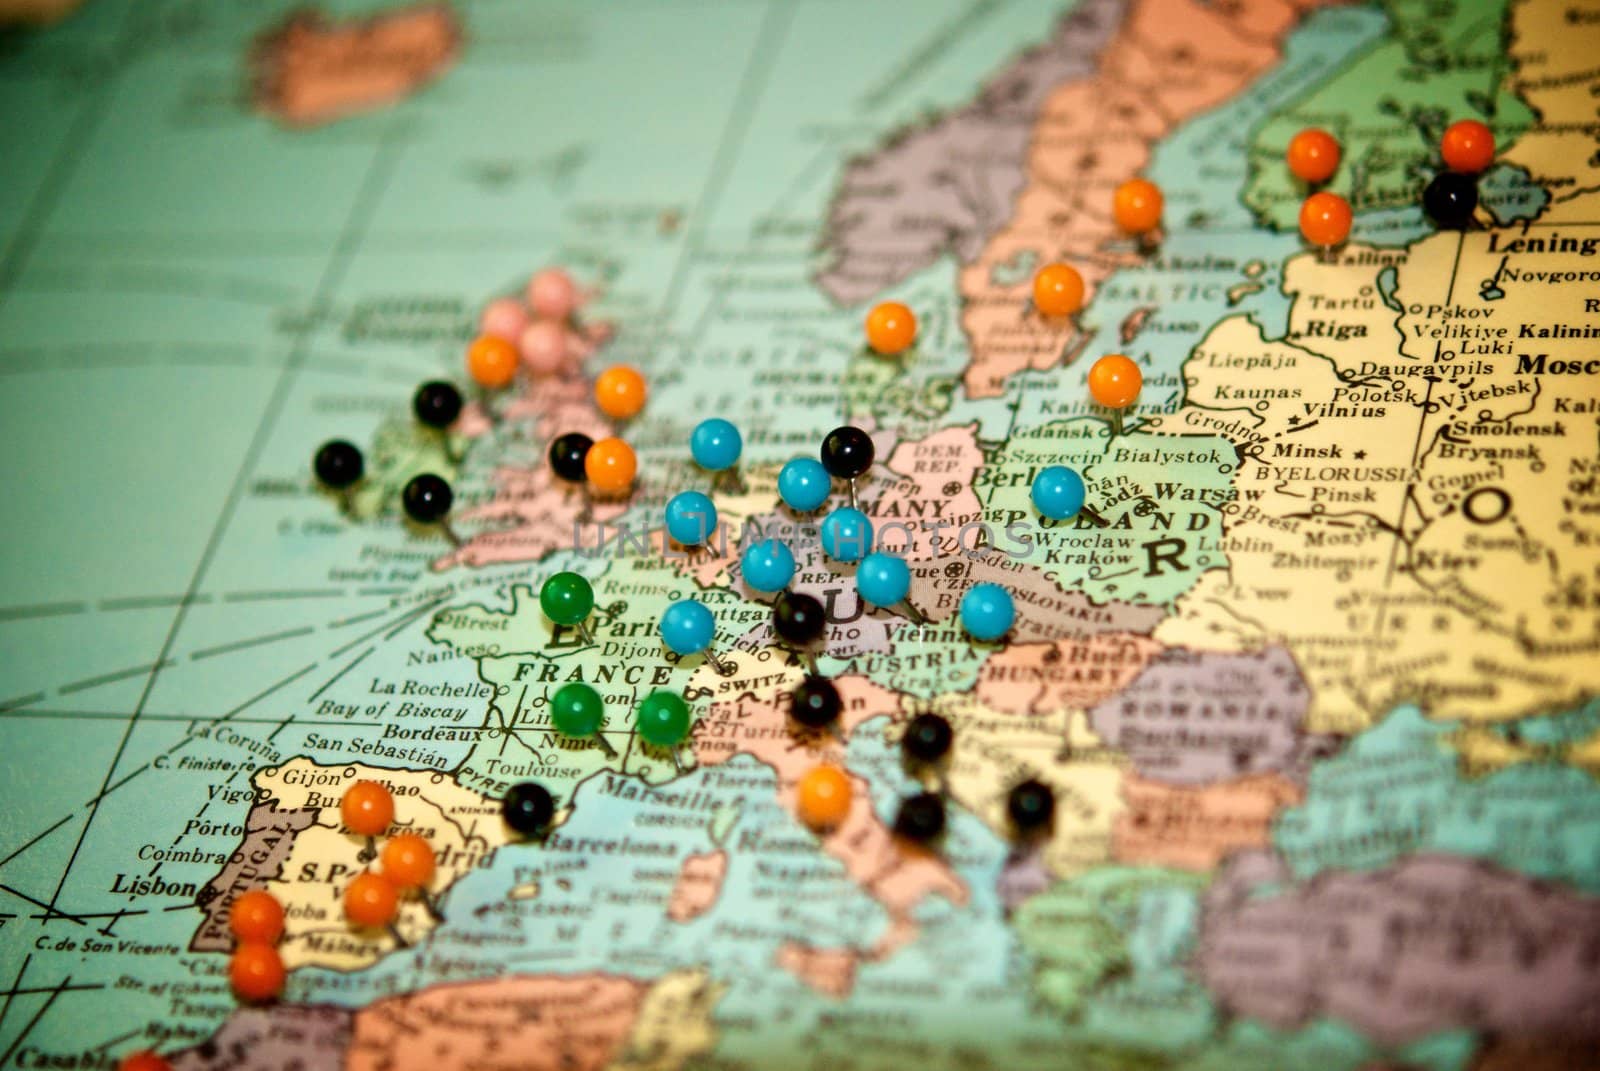 Travel Map with Push Pins with Focus Centered on Paris, France and central Europe